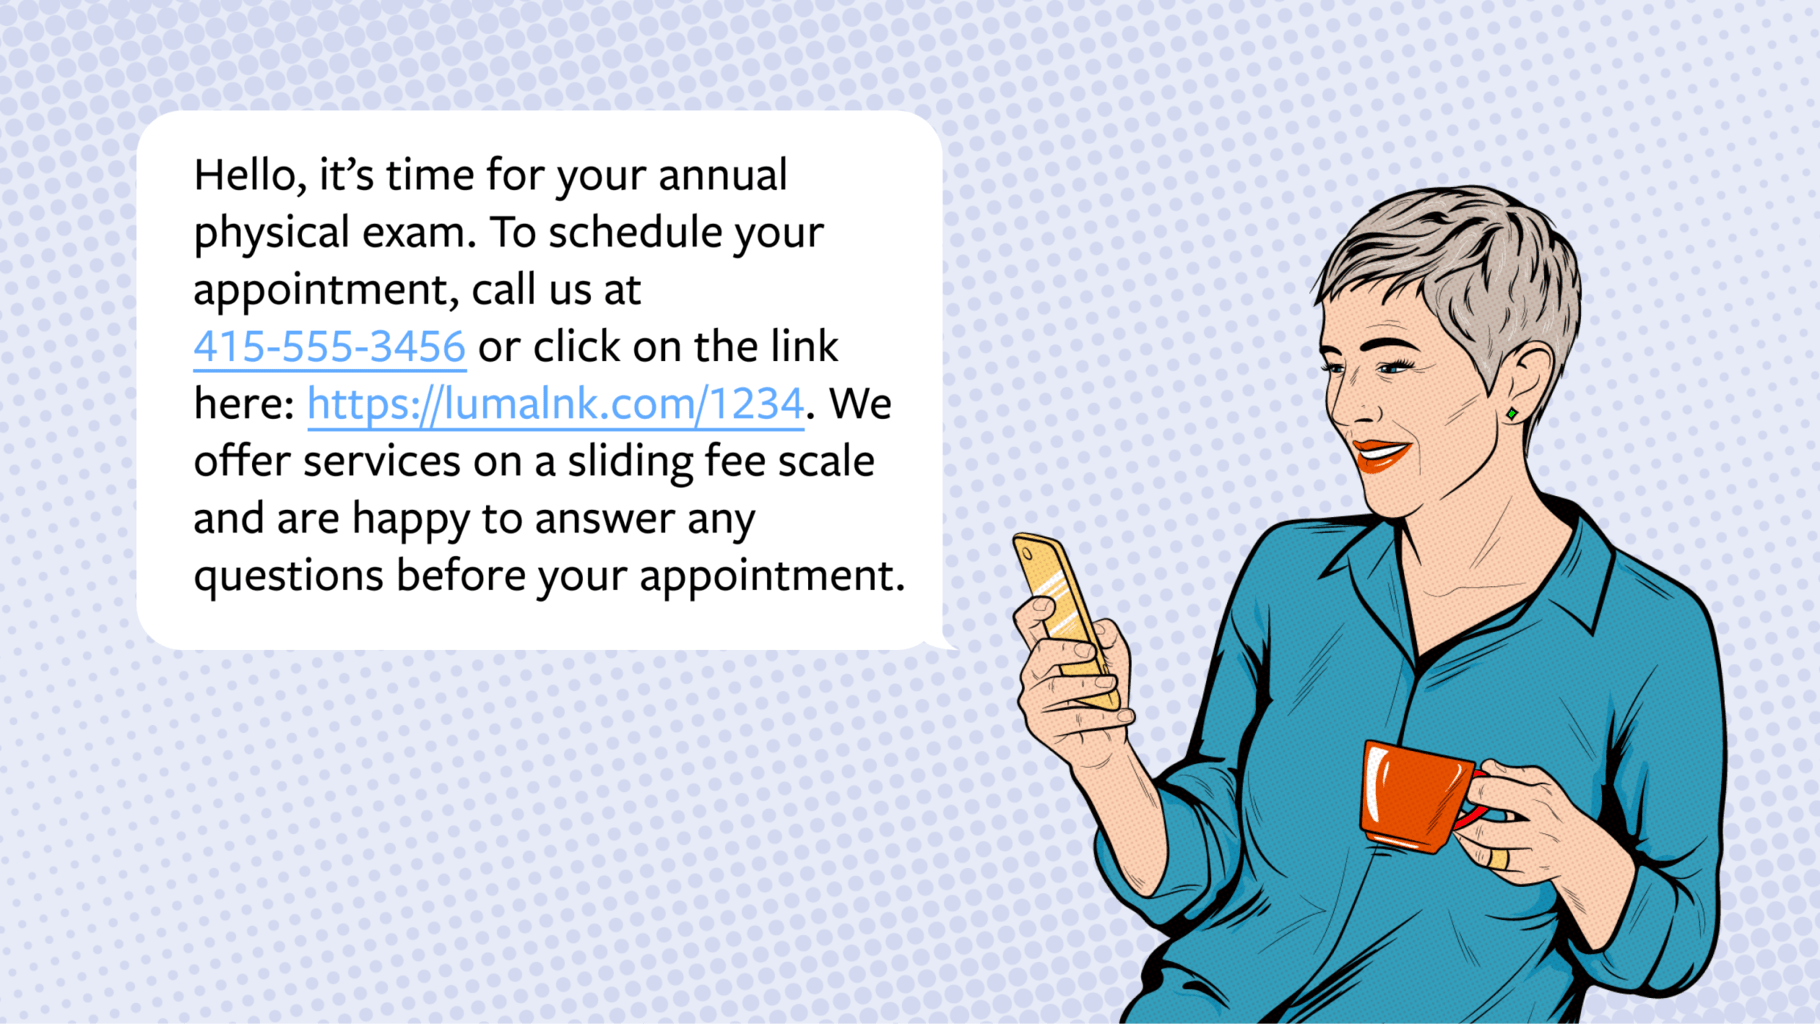 Illustration of a person looking at their phone, with copy showing a notification that it's time for them to have their annual exam